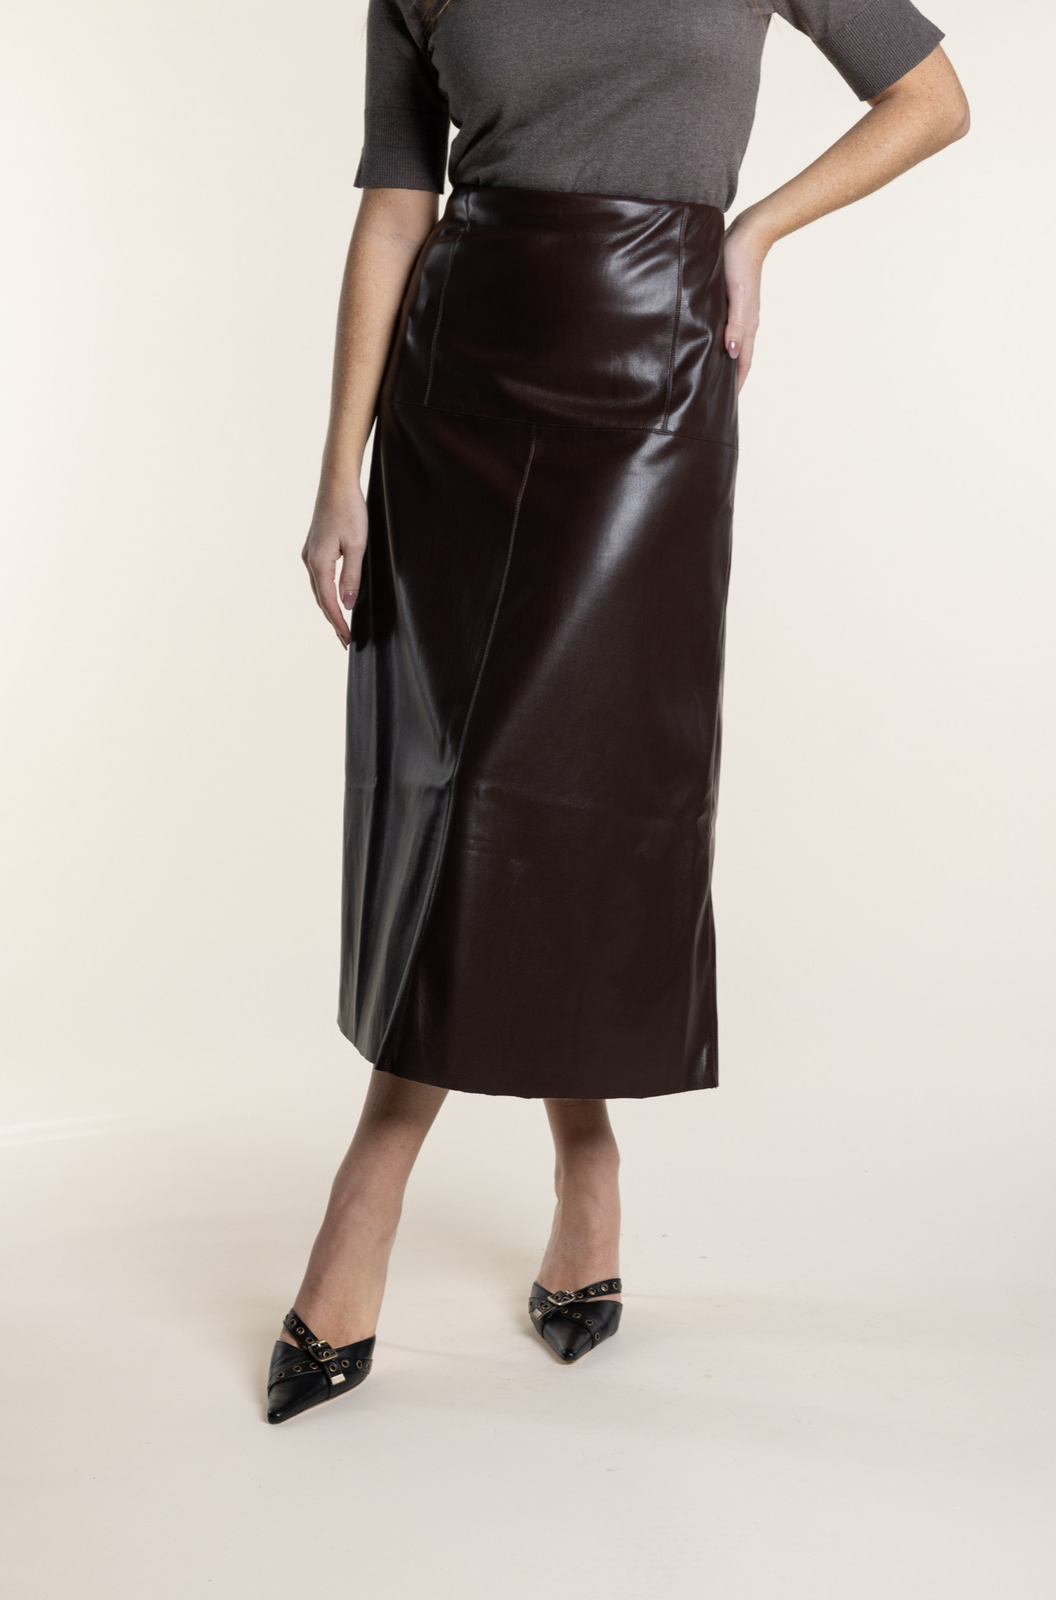 Two-T's Clothing Vegan Leather Skirt in Coco